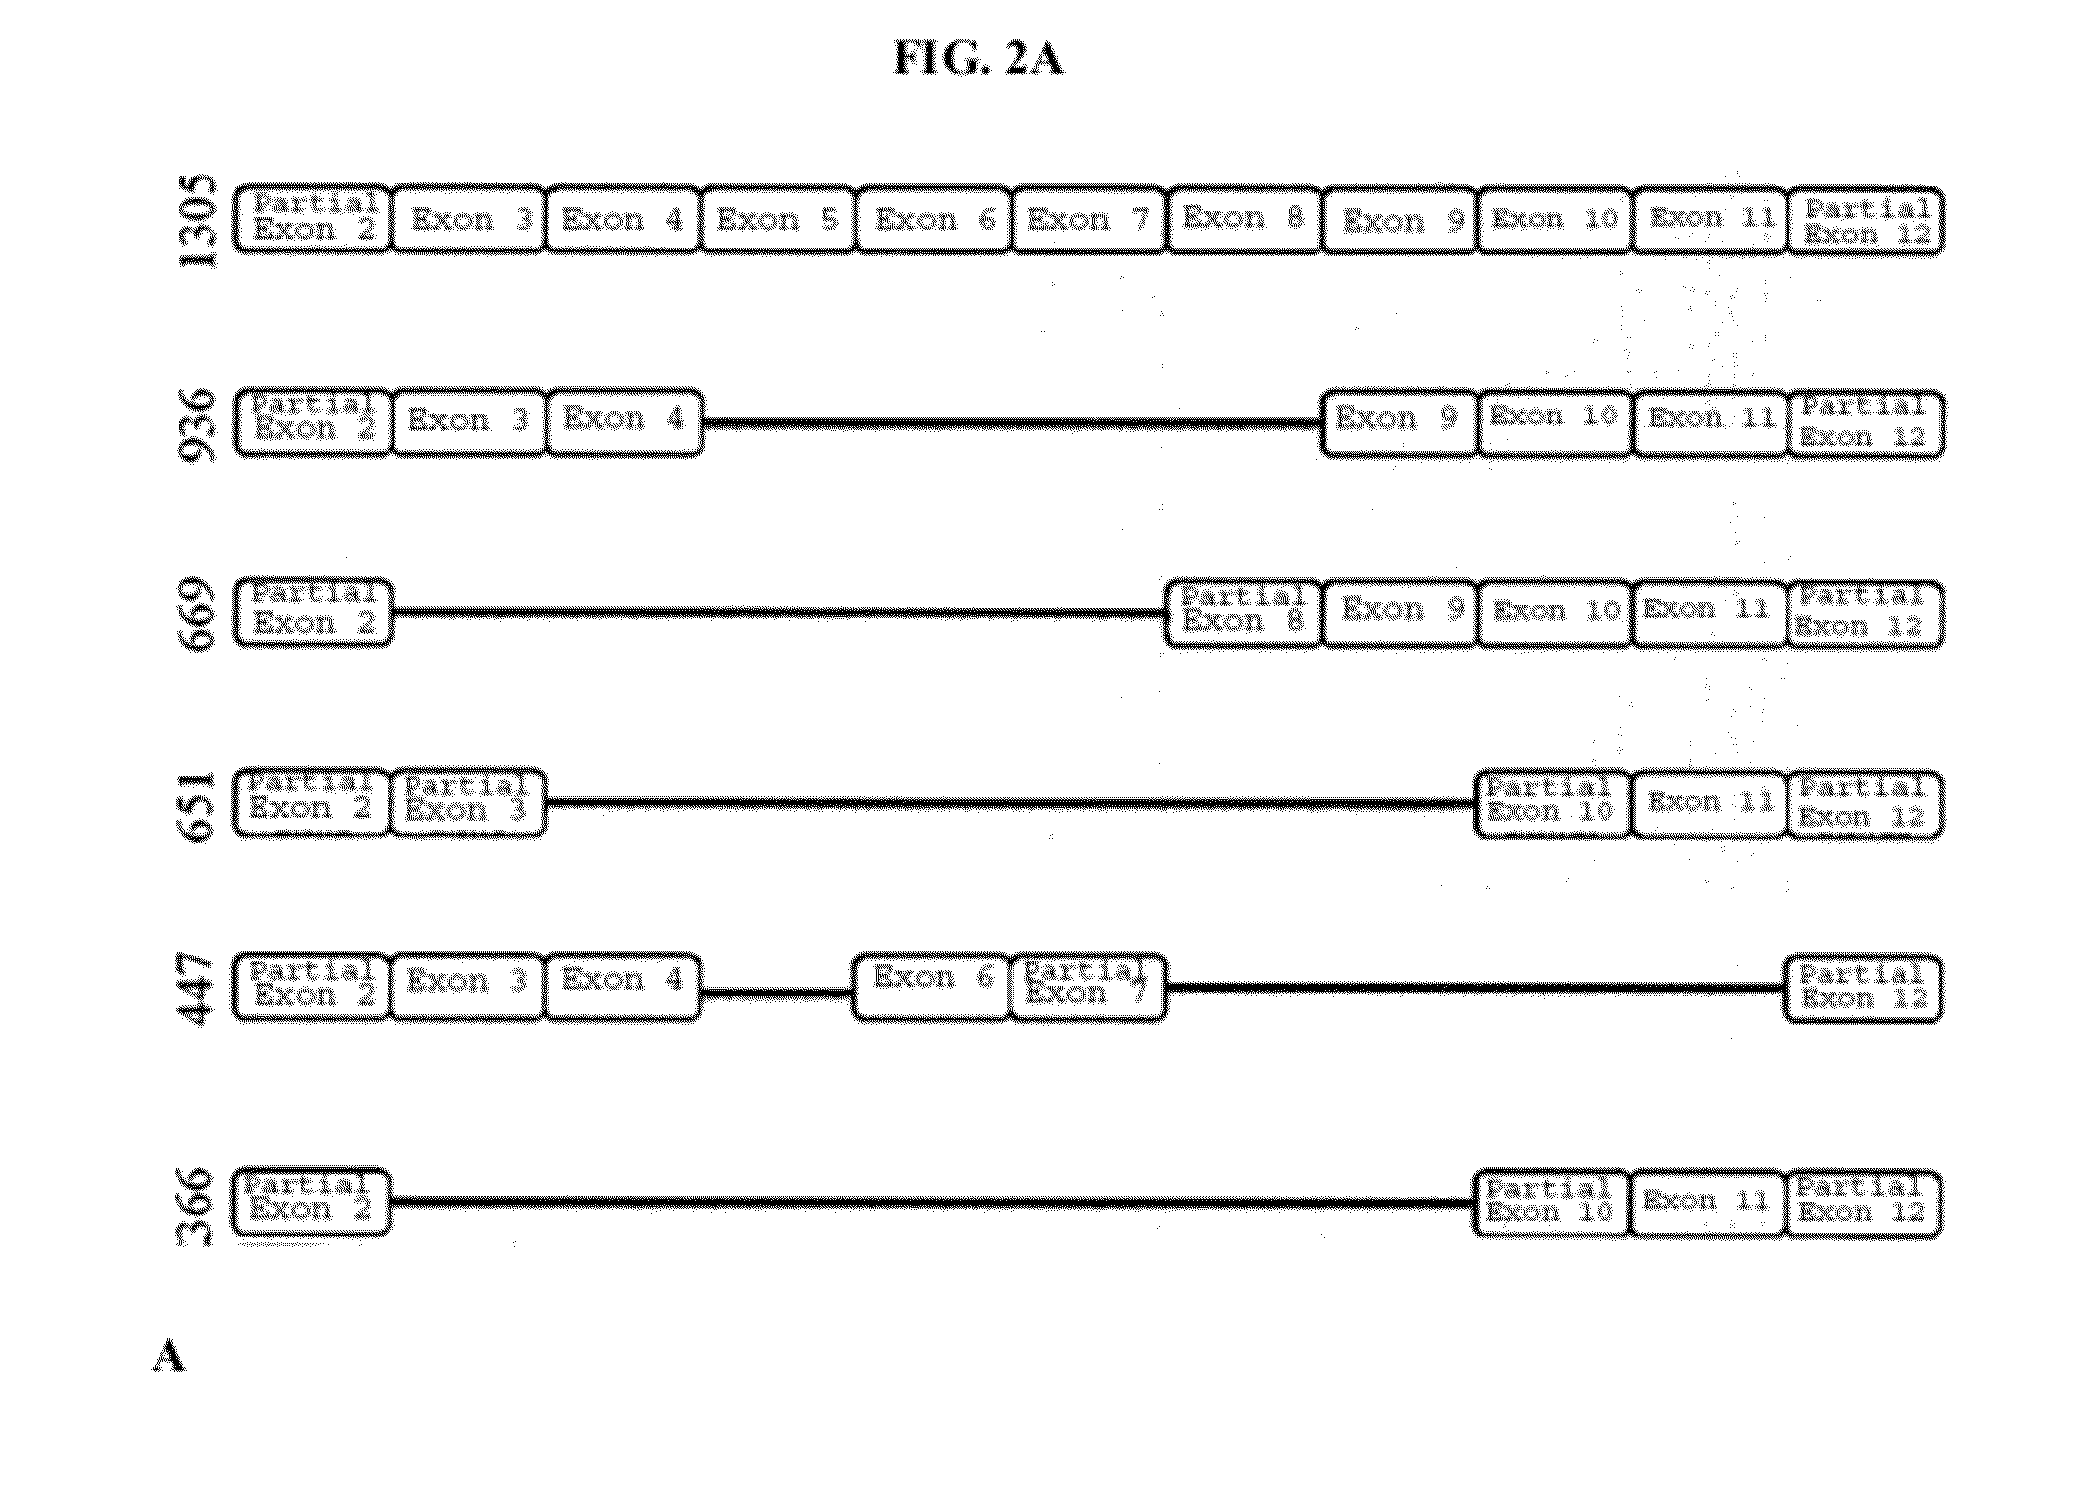 RTEF-1 variants and uses thereof